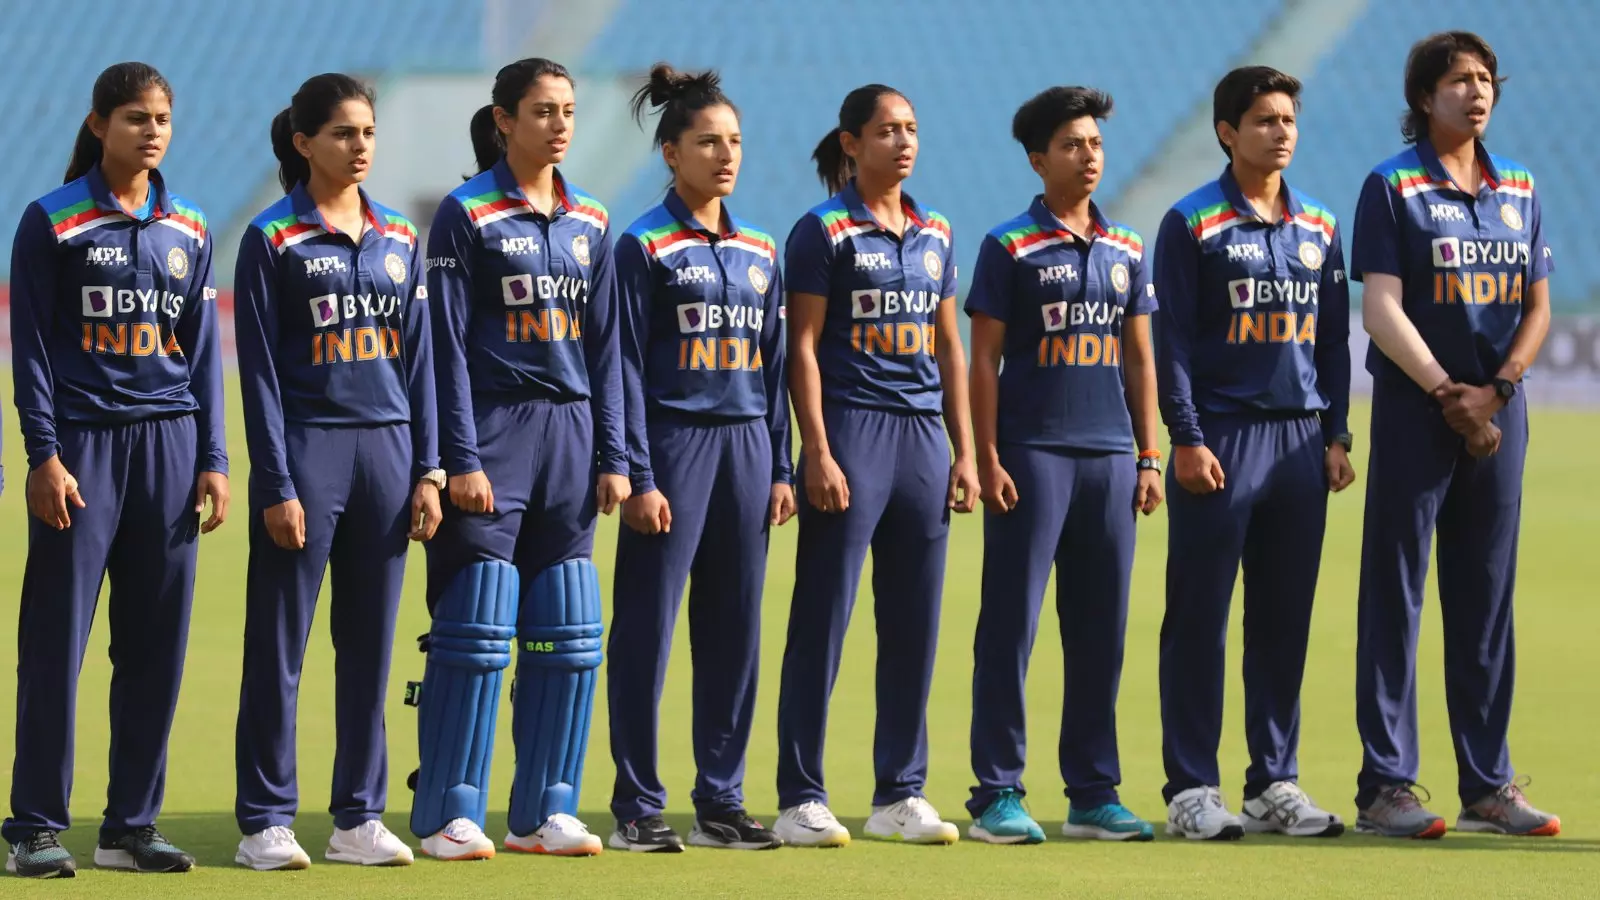 Pathway to play for the Indian Women’s Cricket Team